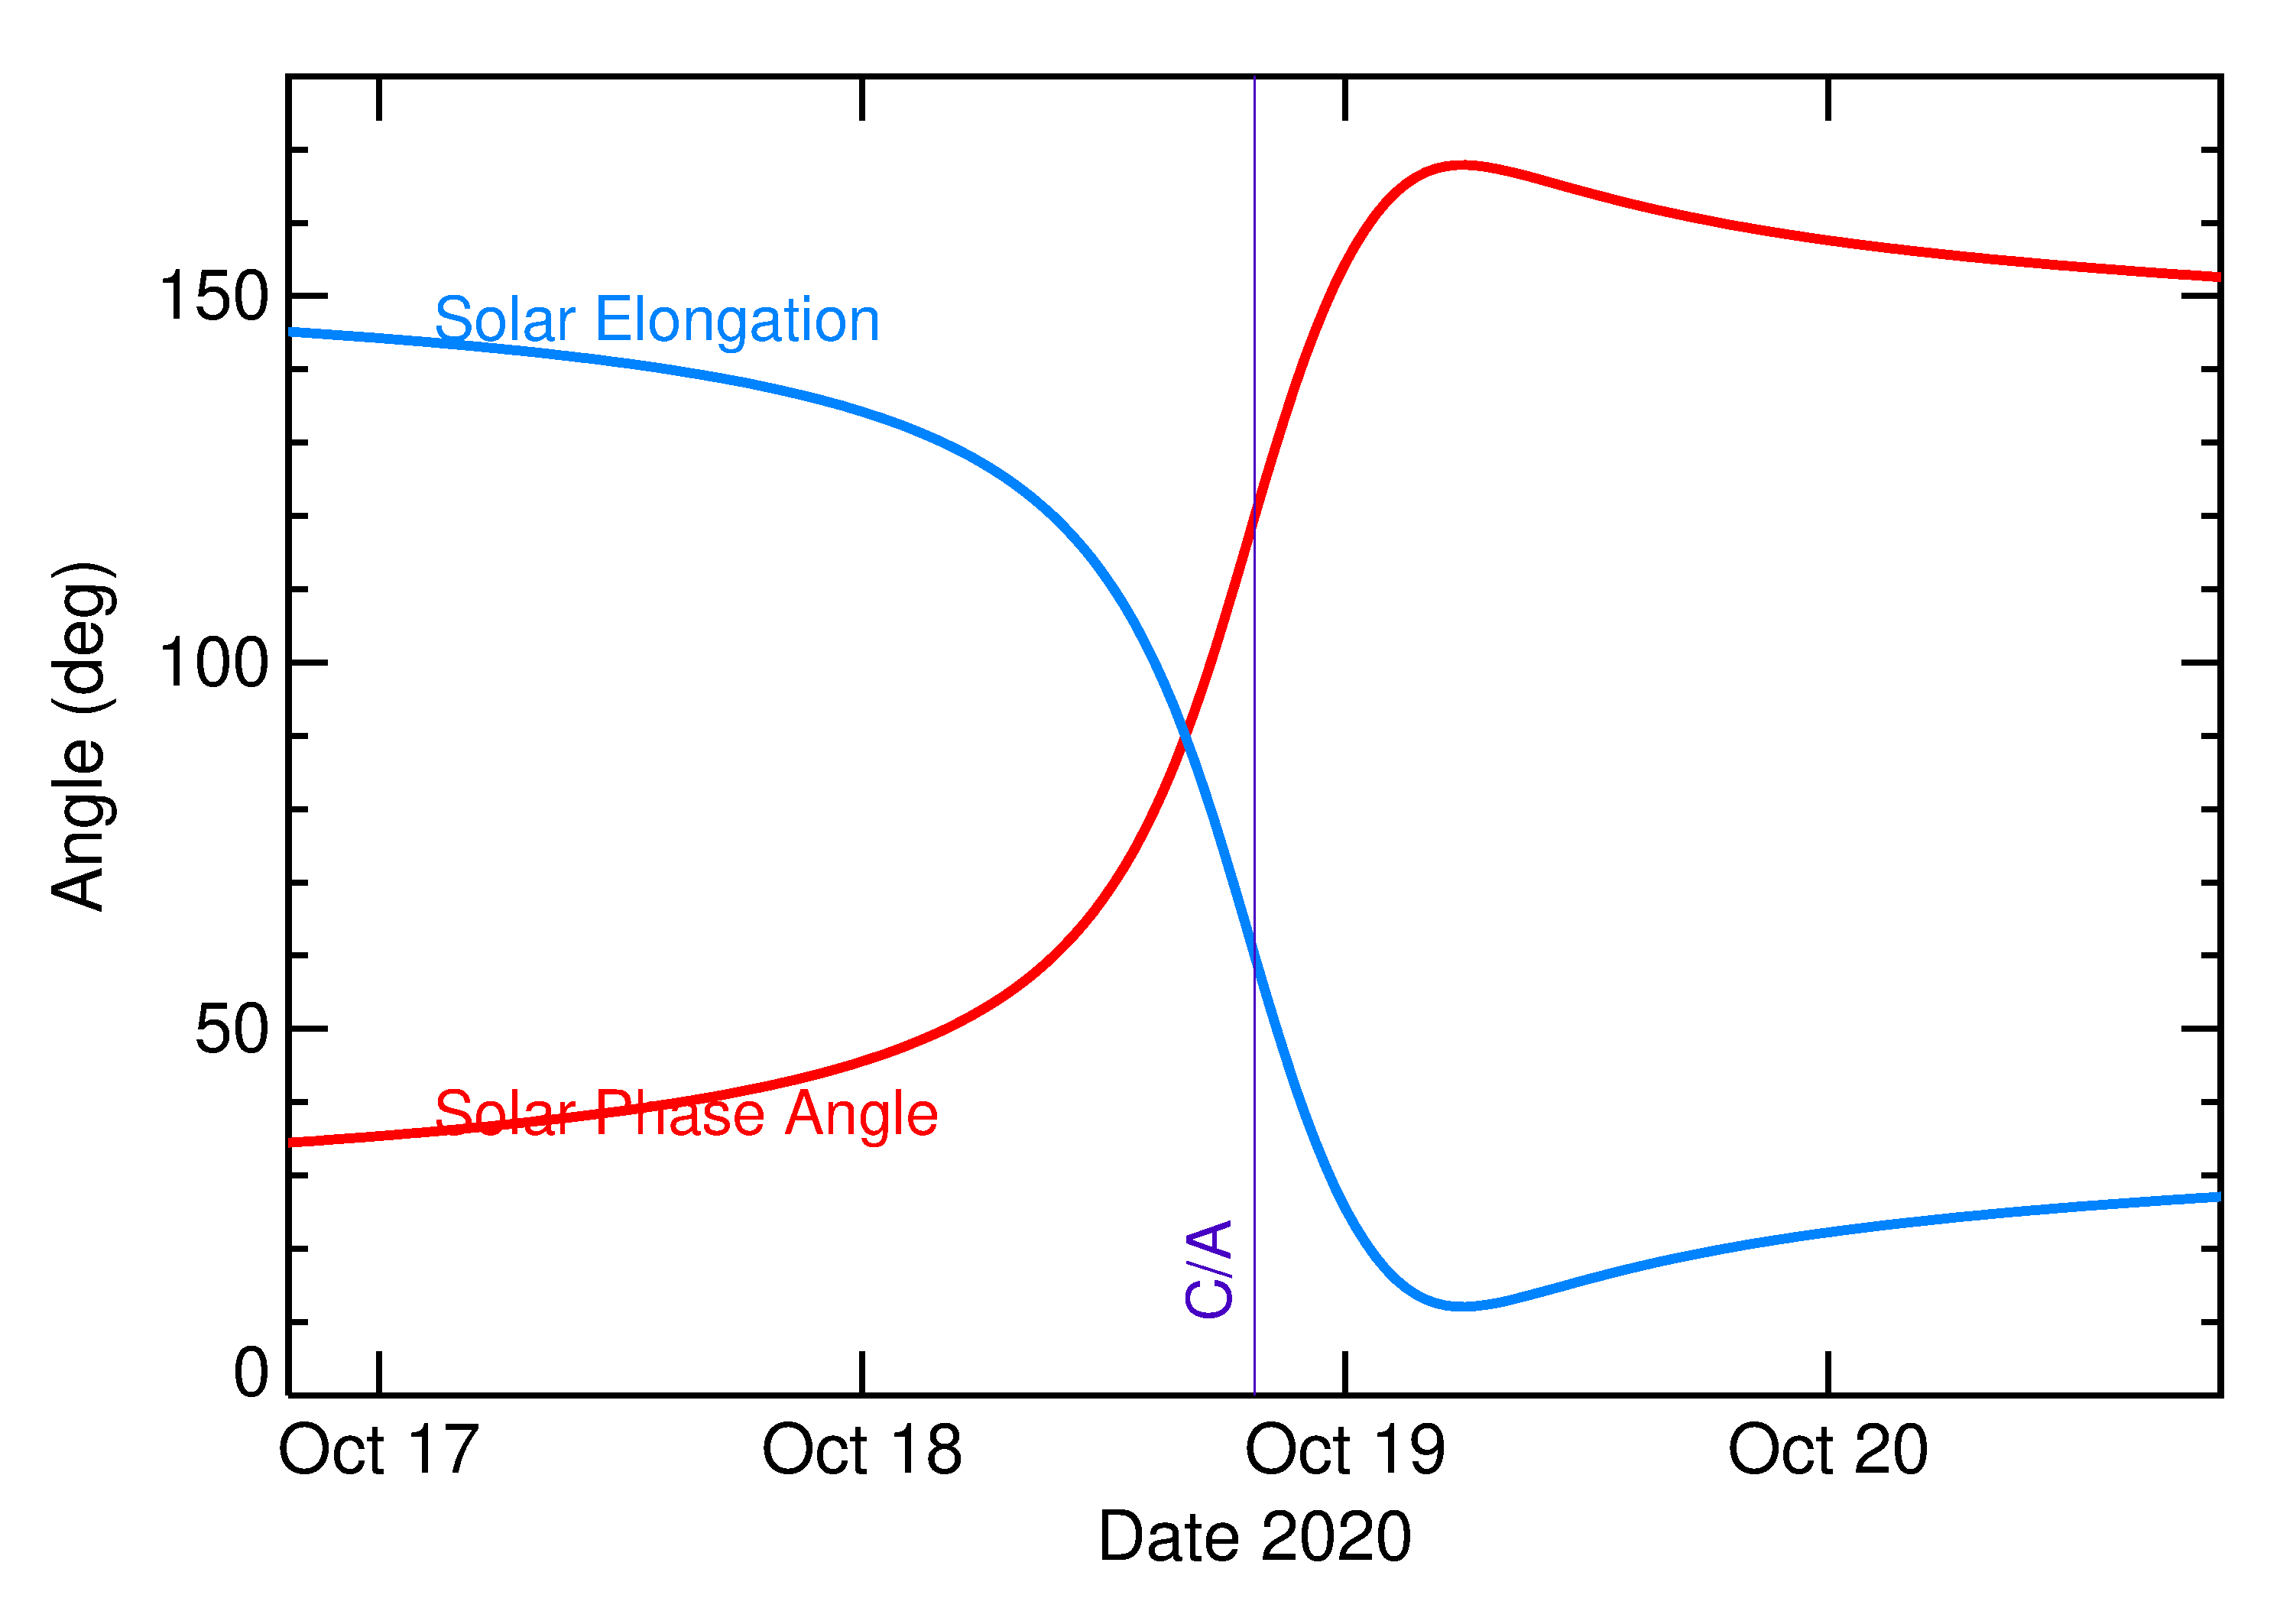 Solar Elongation and Solar Phase Angle of 2020 TE6 in the days around closest approach